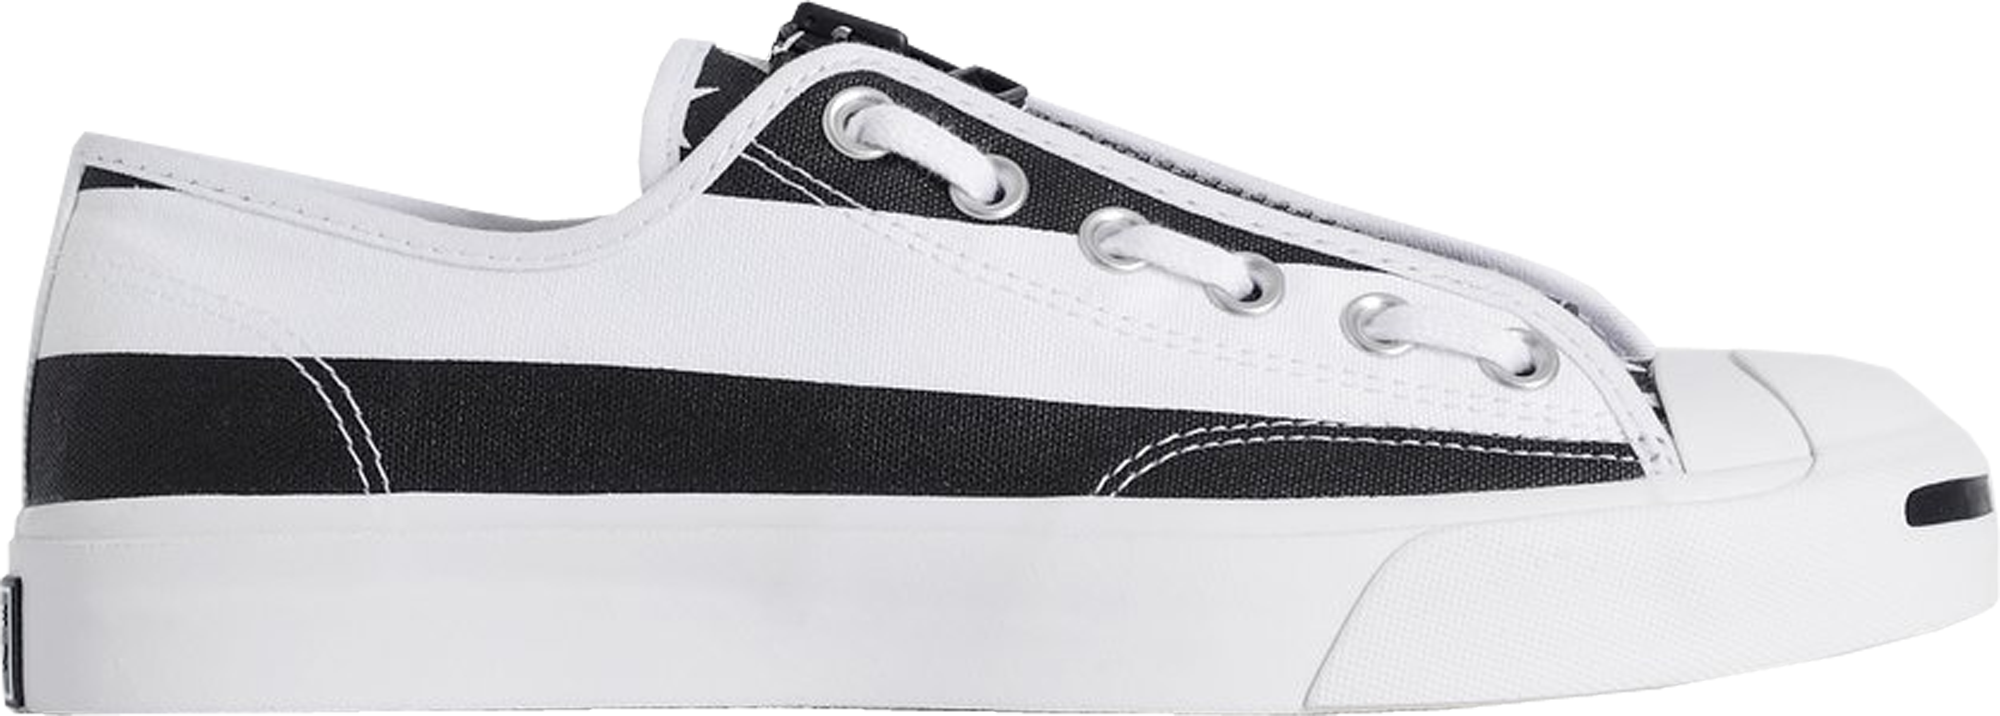 converse jack purcell japan edition ox